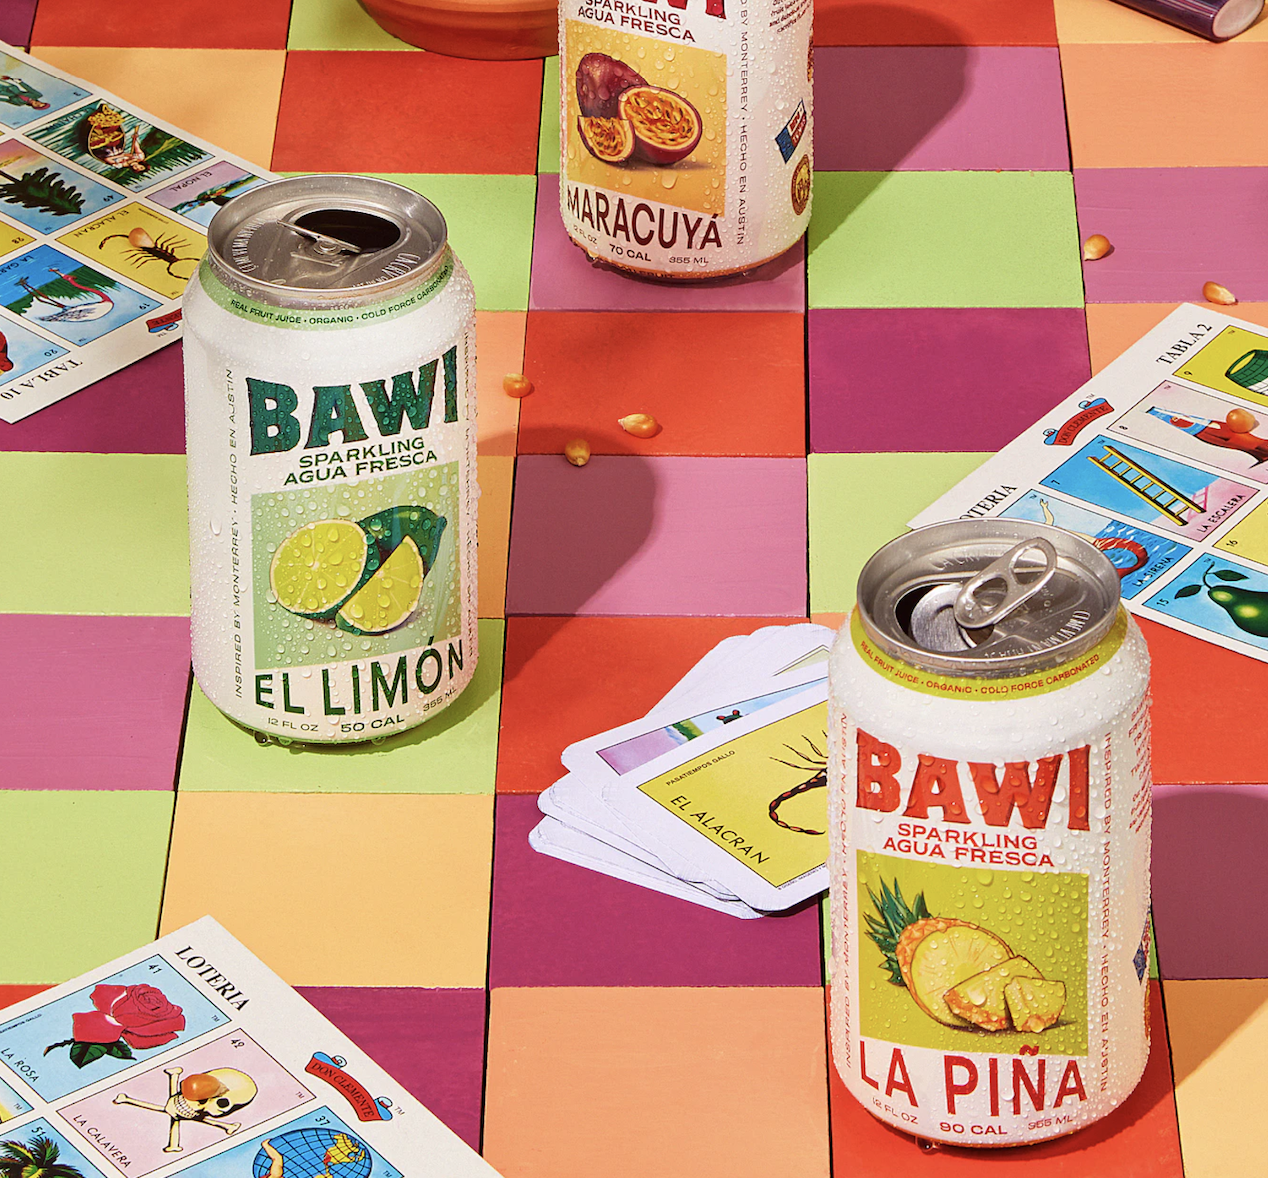 Three cans of agua frescas sitting near Loteria cards on colorful tiles.